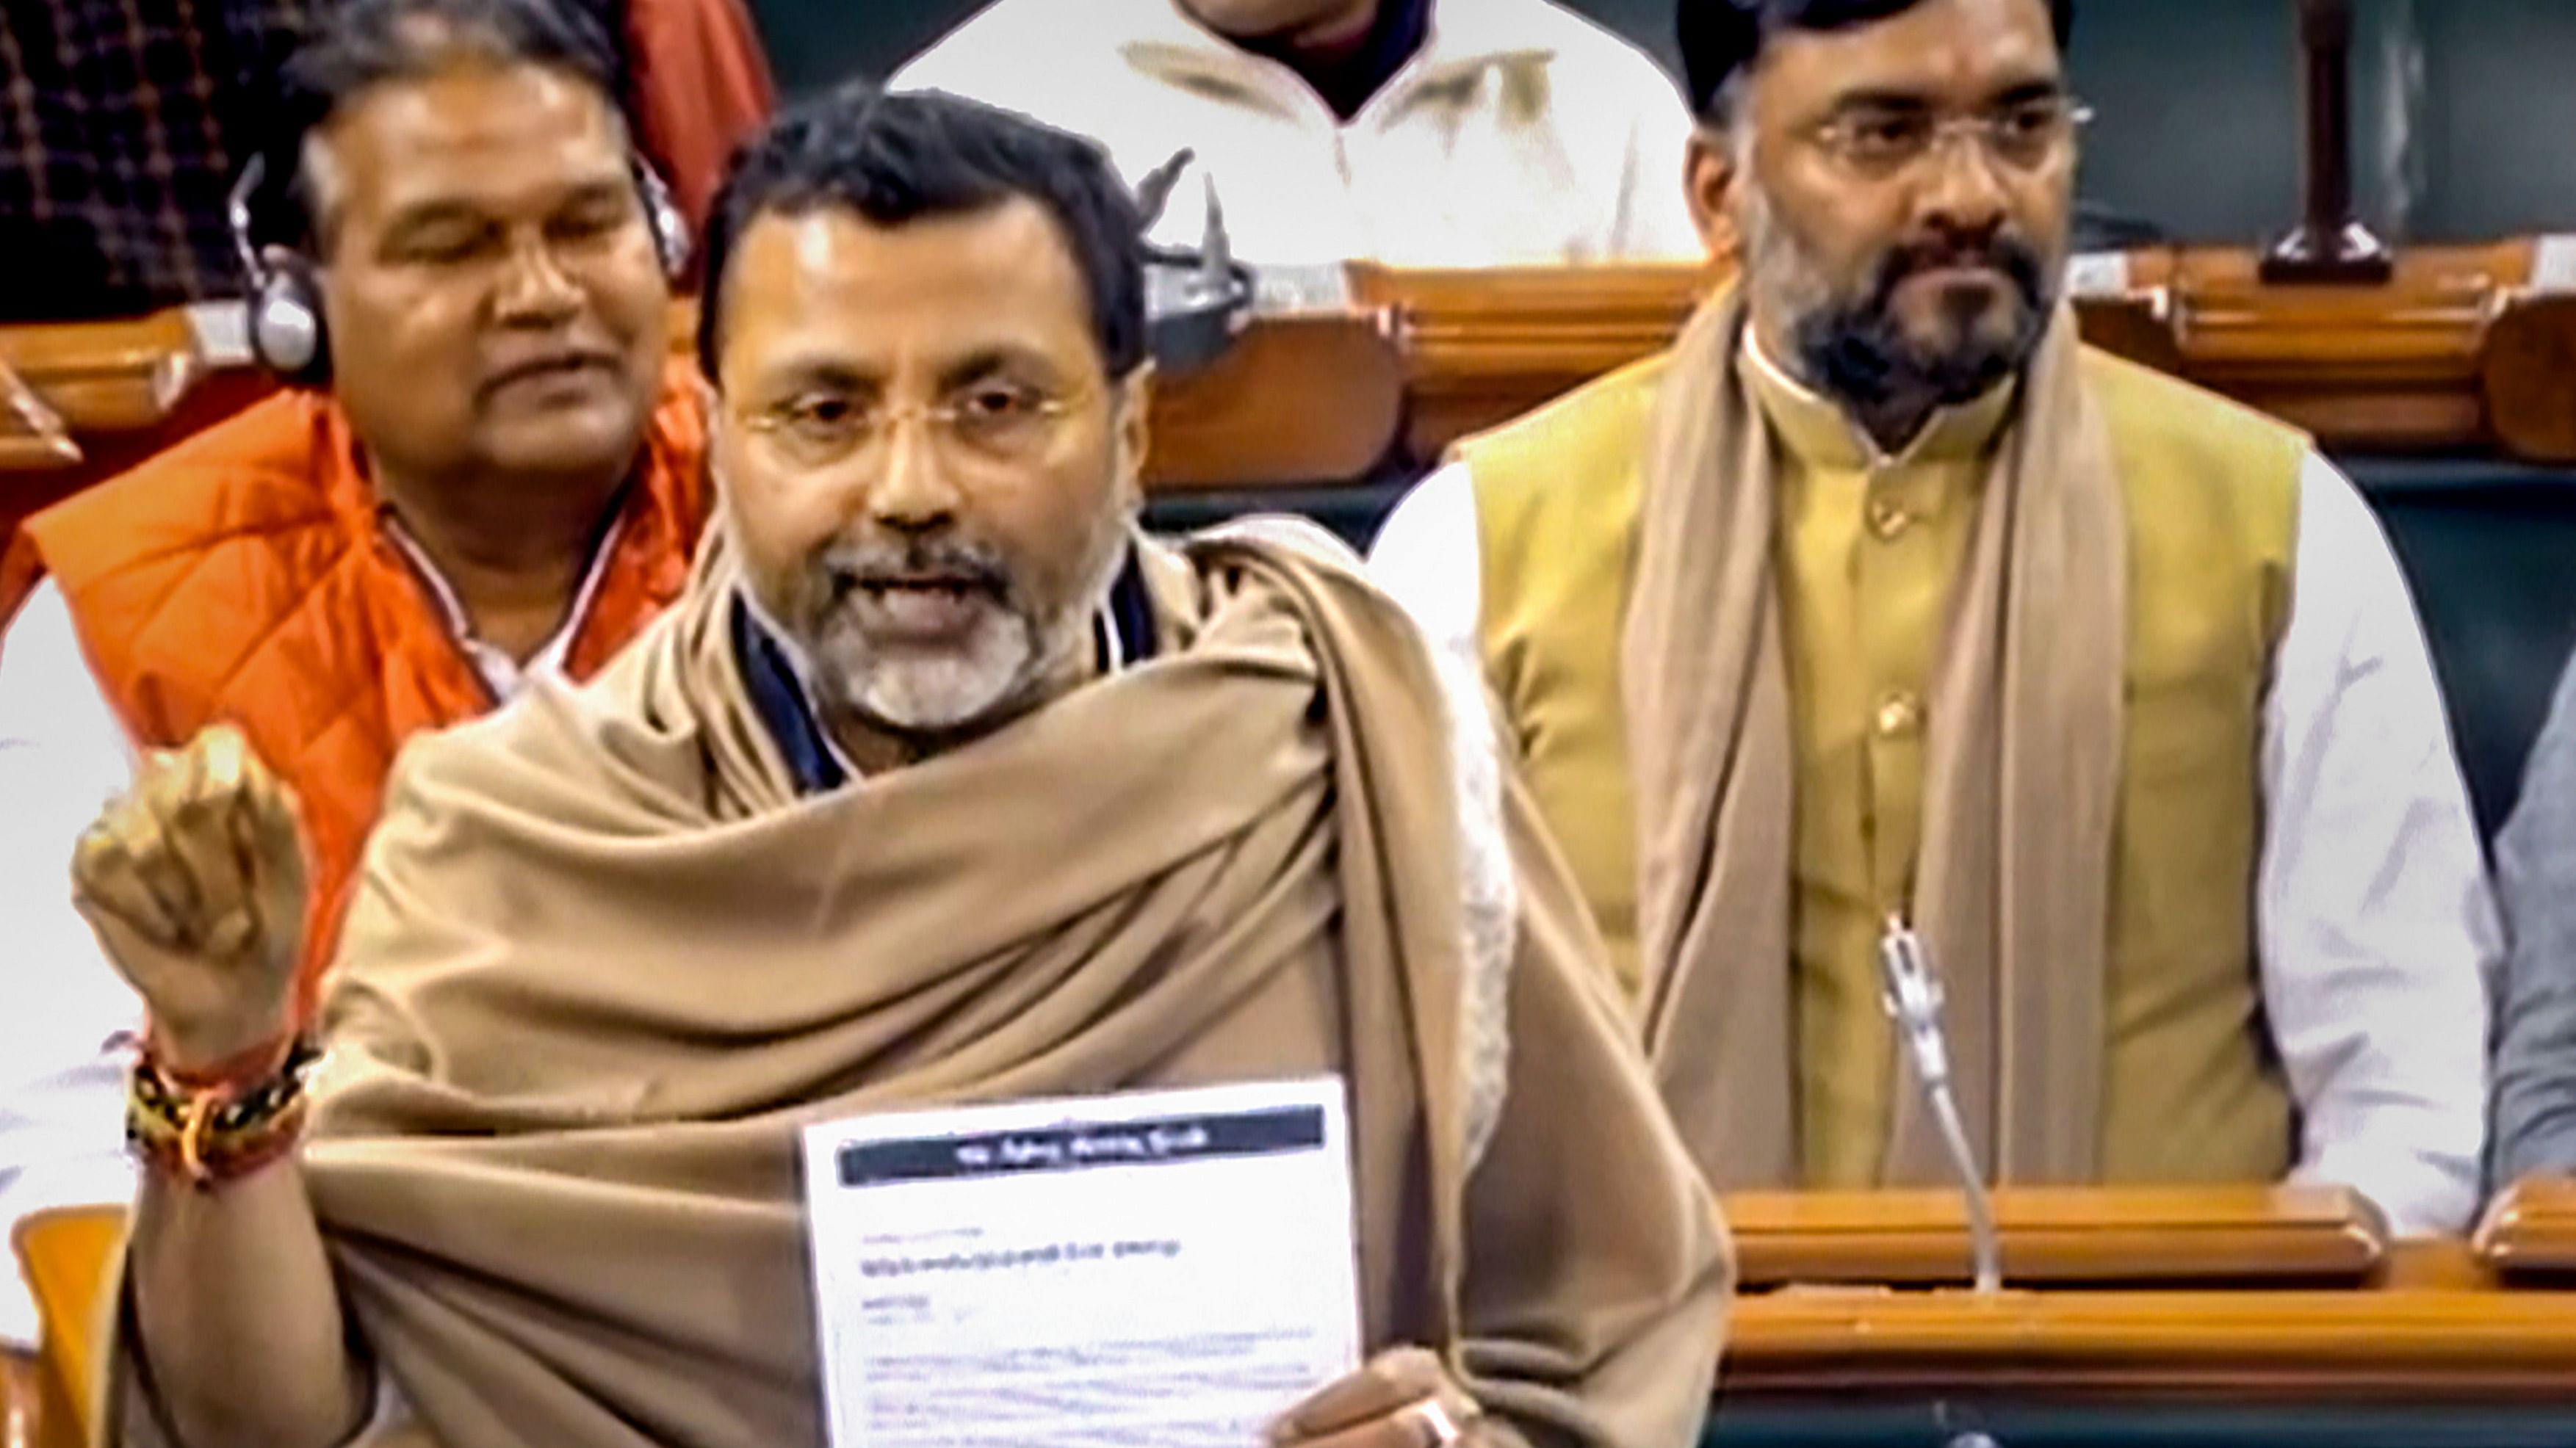  BJP MP Nishikant Dubey speaks in the Lok Sabha during Budget Session of Parliament. Credit: PTI Photo